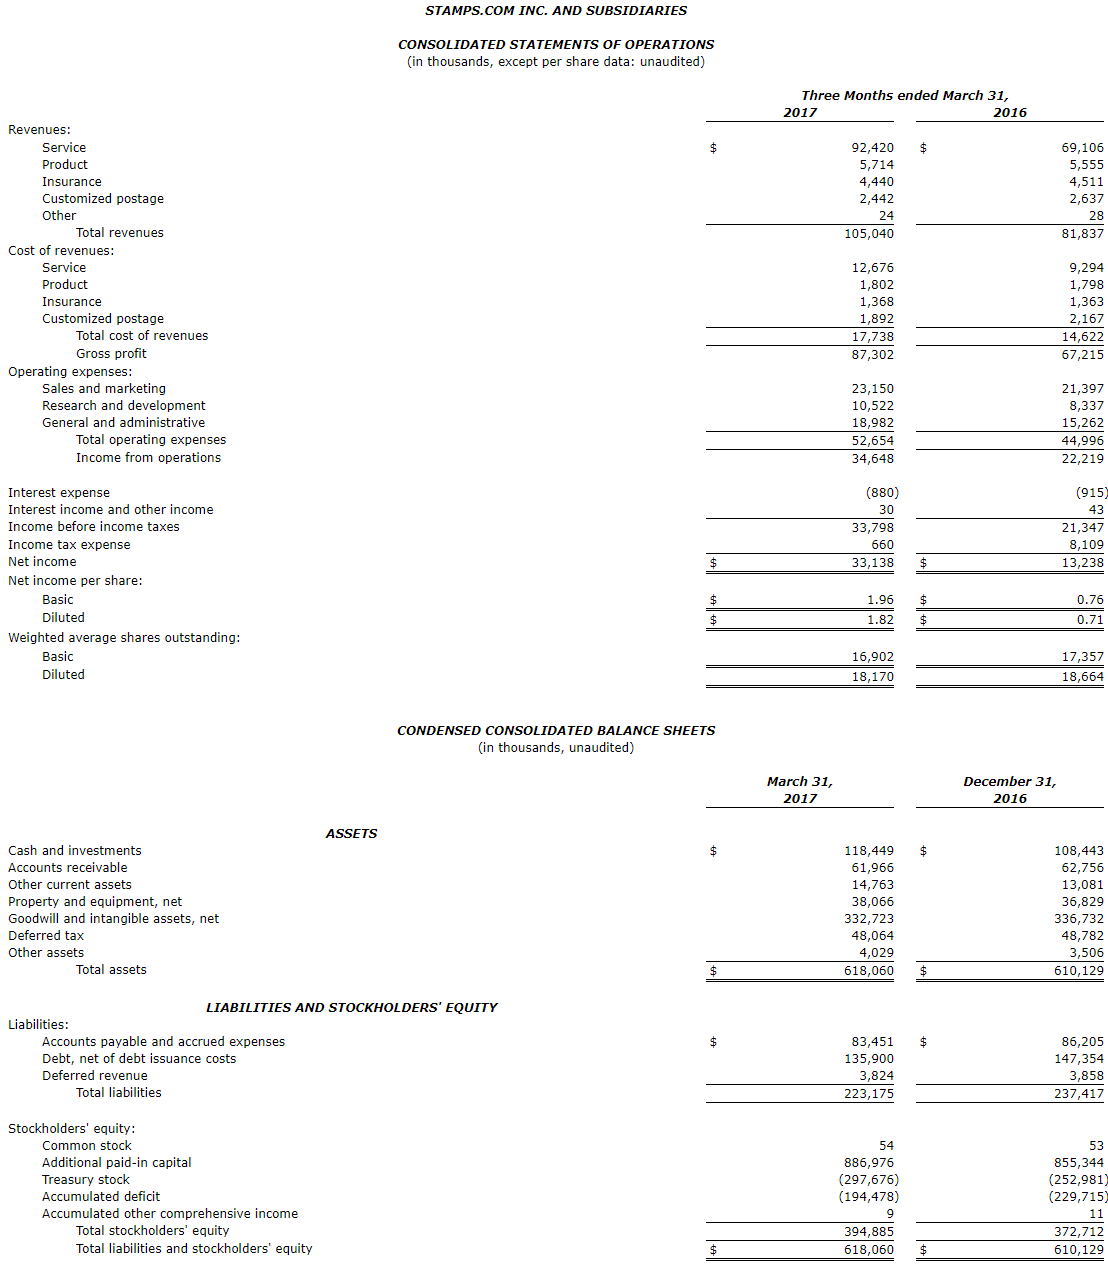 Table of Financial Data